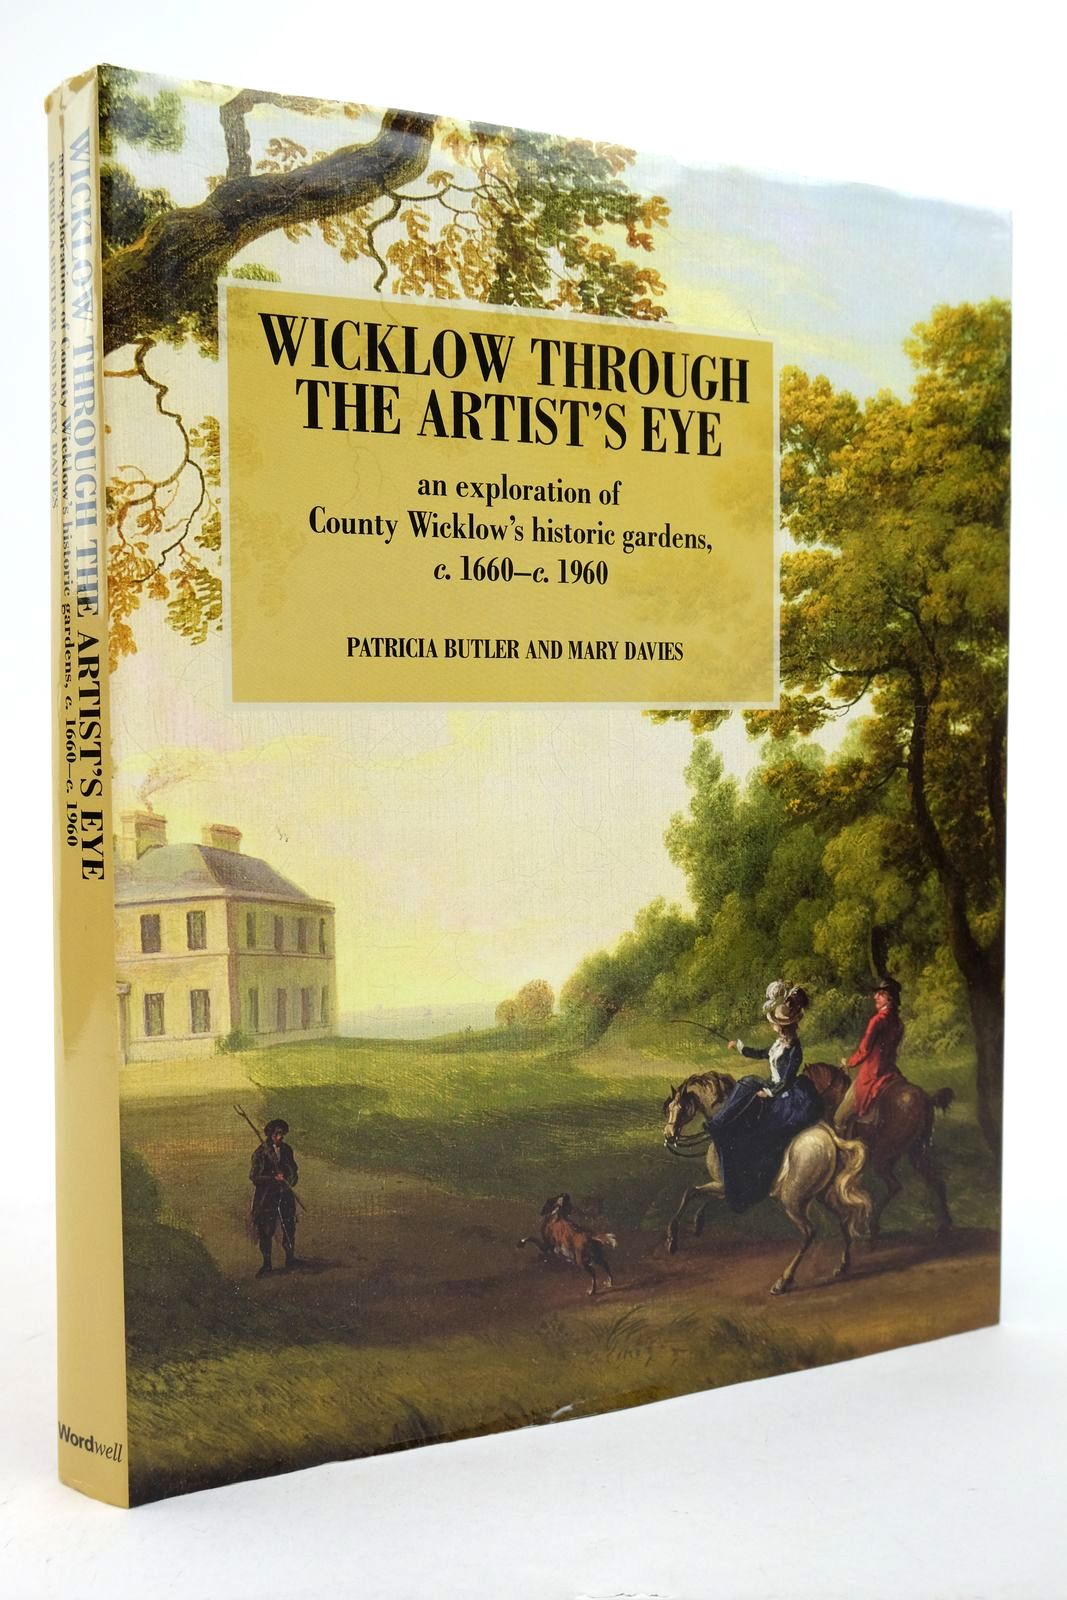 Photo of WICKLOW THROUGH THE ARTIST'S EYE: AN EXPLORATION OF COUNTY WICKLOW'S HISTORIC GARDENS, C. 1660-C. 1960 written by Butler, Patricia Davies, Mary published by Wordwell Ltd (STOCK CODE: 2140609)  for sale by Stella & Rose's Books